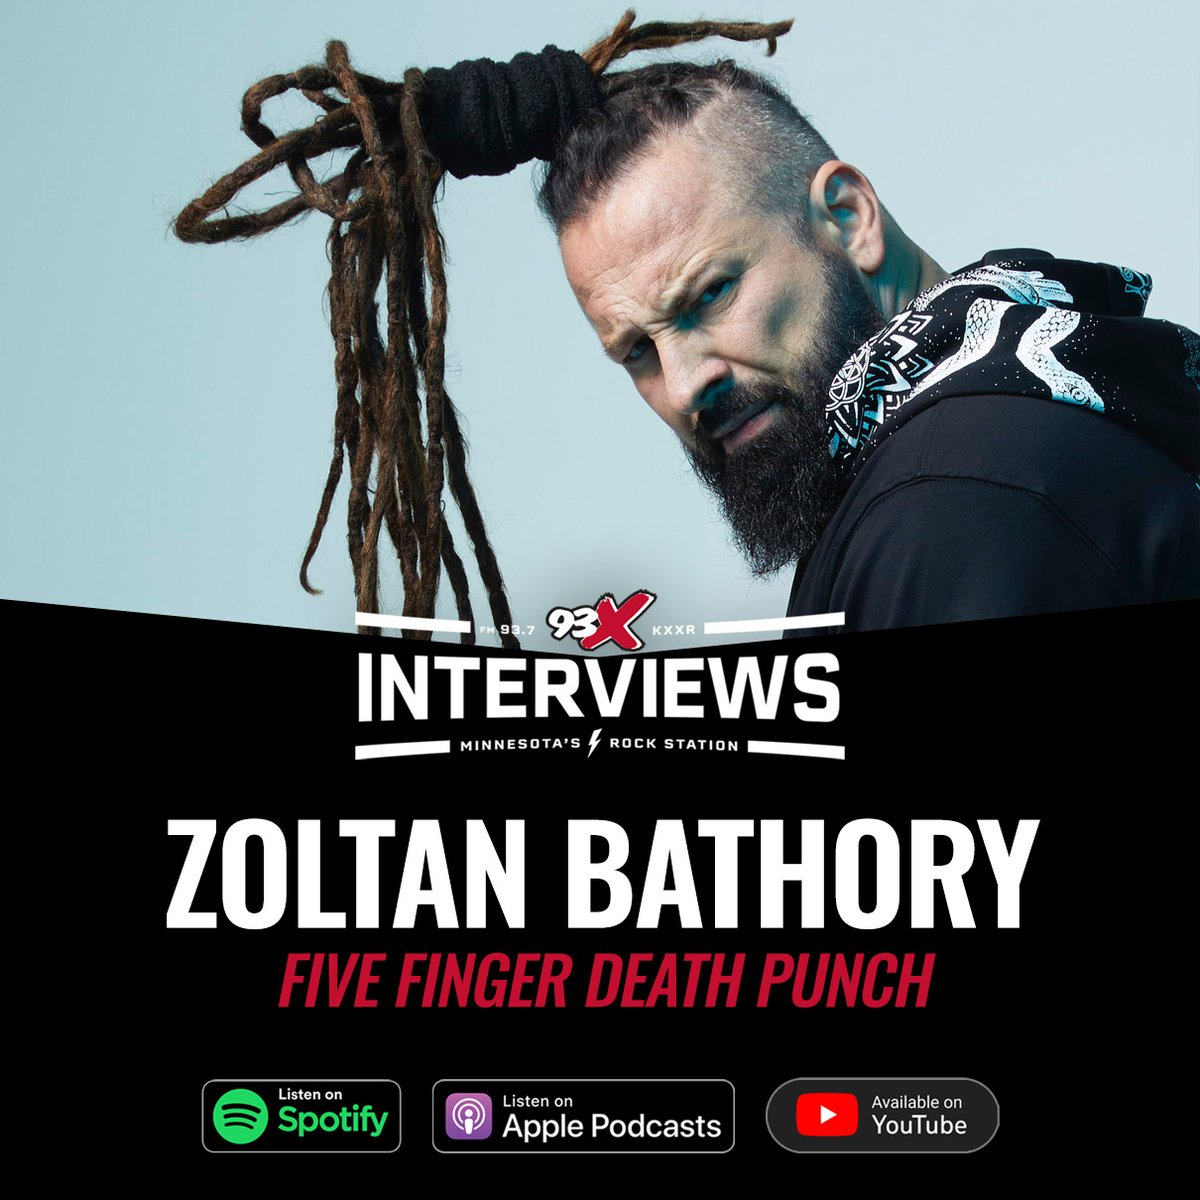 NEW INTERVIEW: @93XPablo & @ZoltanBathory of Five Finger Death Punch talk: - Deluxe edition of Afterlife (out Friday) - New song collab with DMX - Upcoming tour with Metallica 📺: YouTube (93XRadio) 👂: Spotify, Apple Podcasts, Amazon